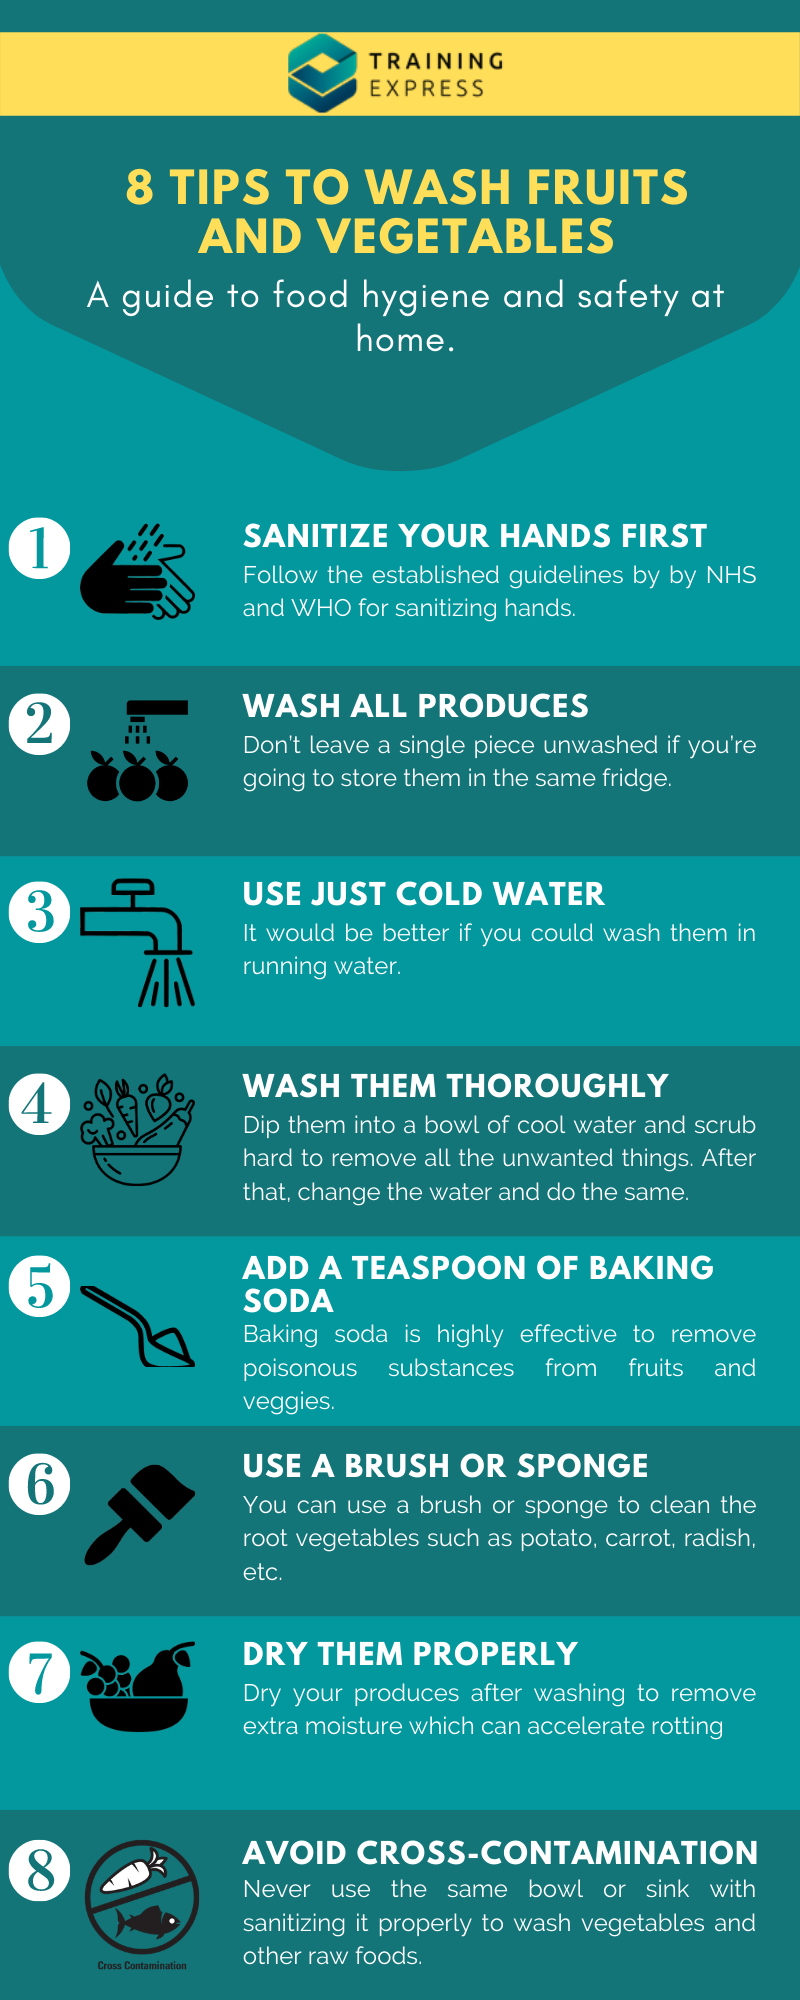 https://trainingexpress.org.uk/wp-content/uploads/2020/08/8-Tips-to-Wash-Fruits-and-Vegetables.png